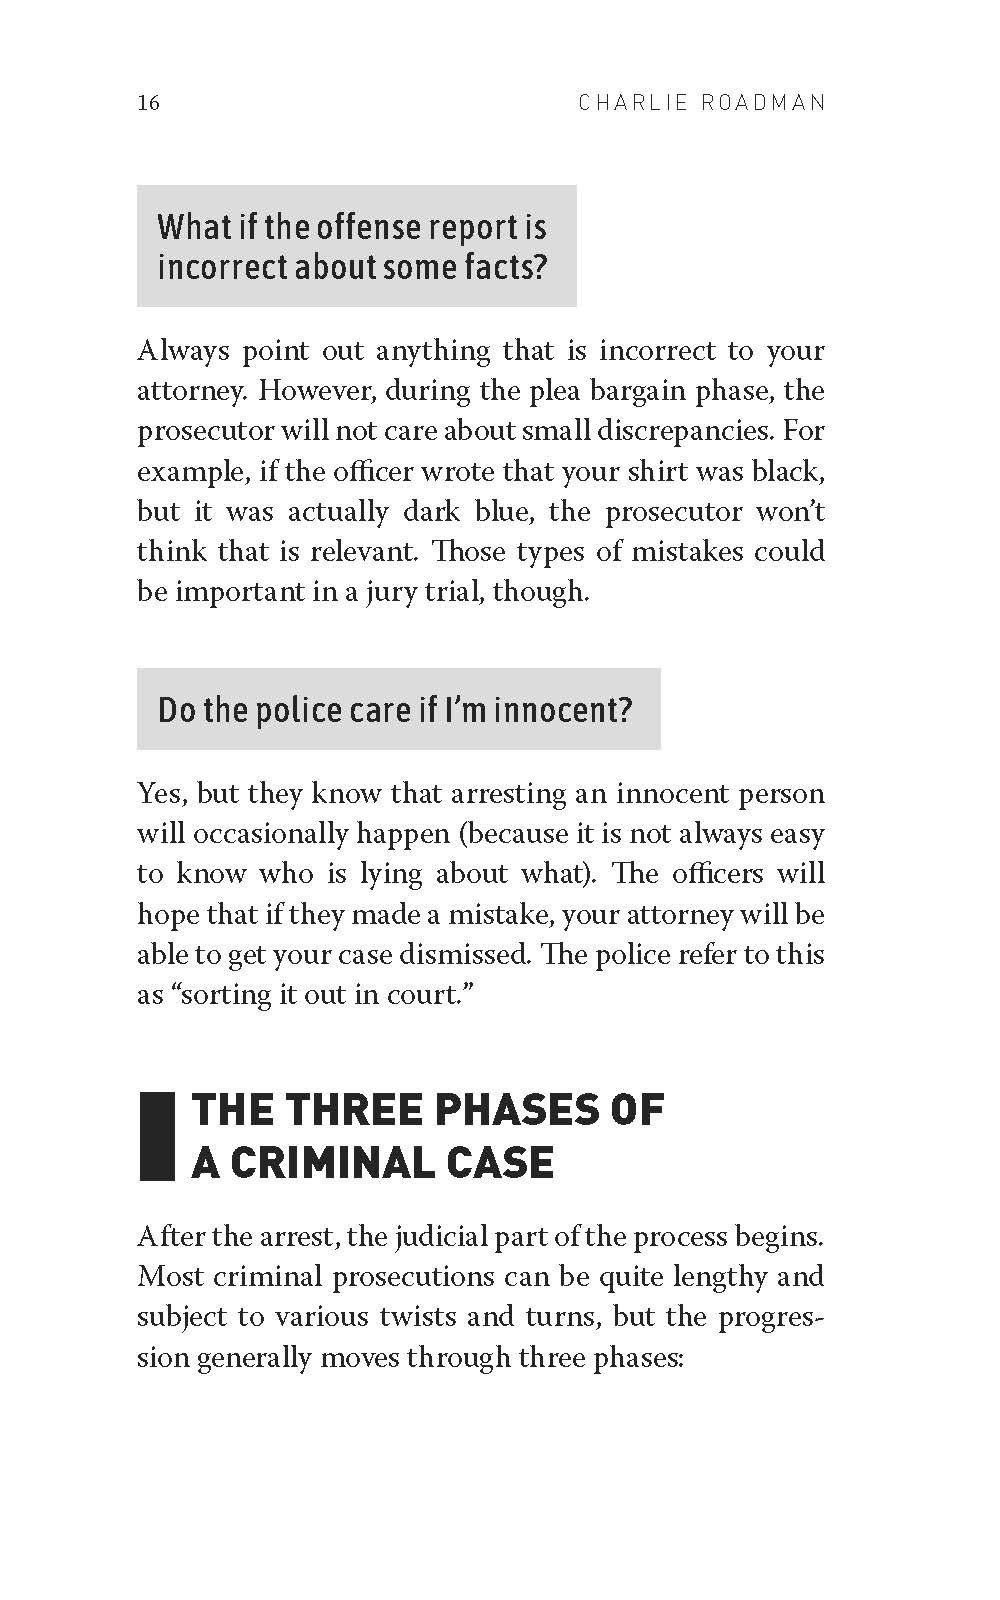 Sample_of_Defendant_s_Guide_to_Defense_Page_19.jpg